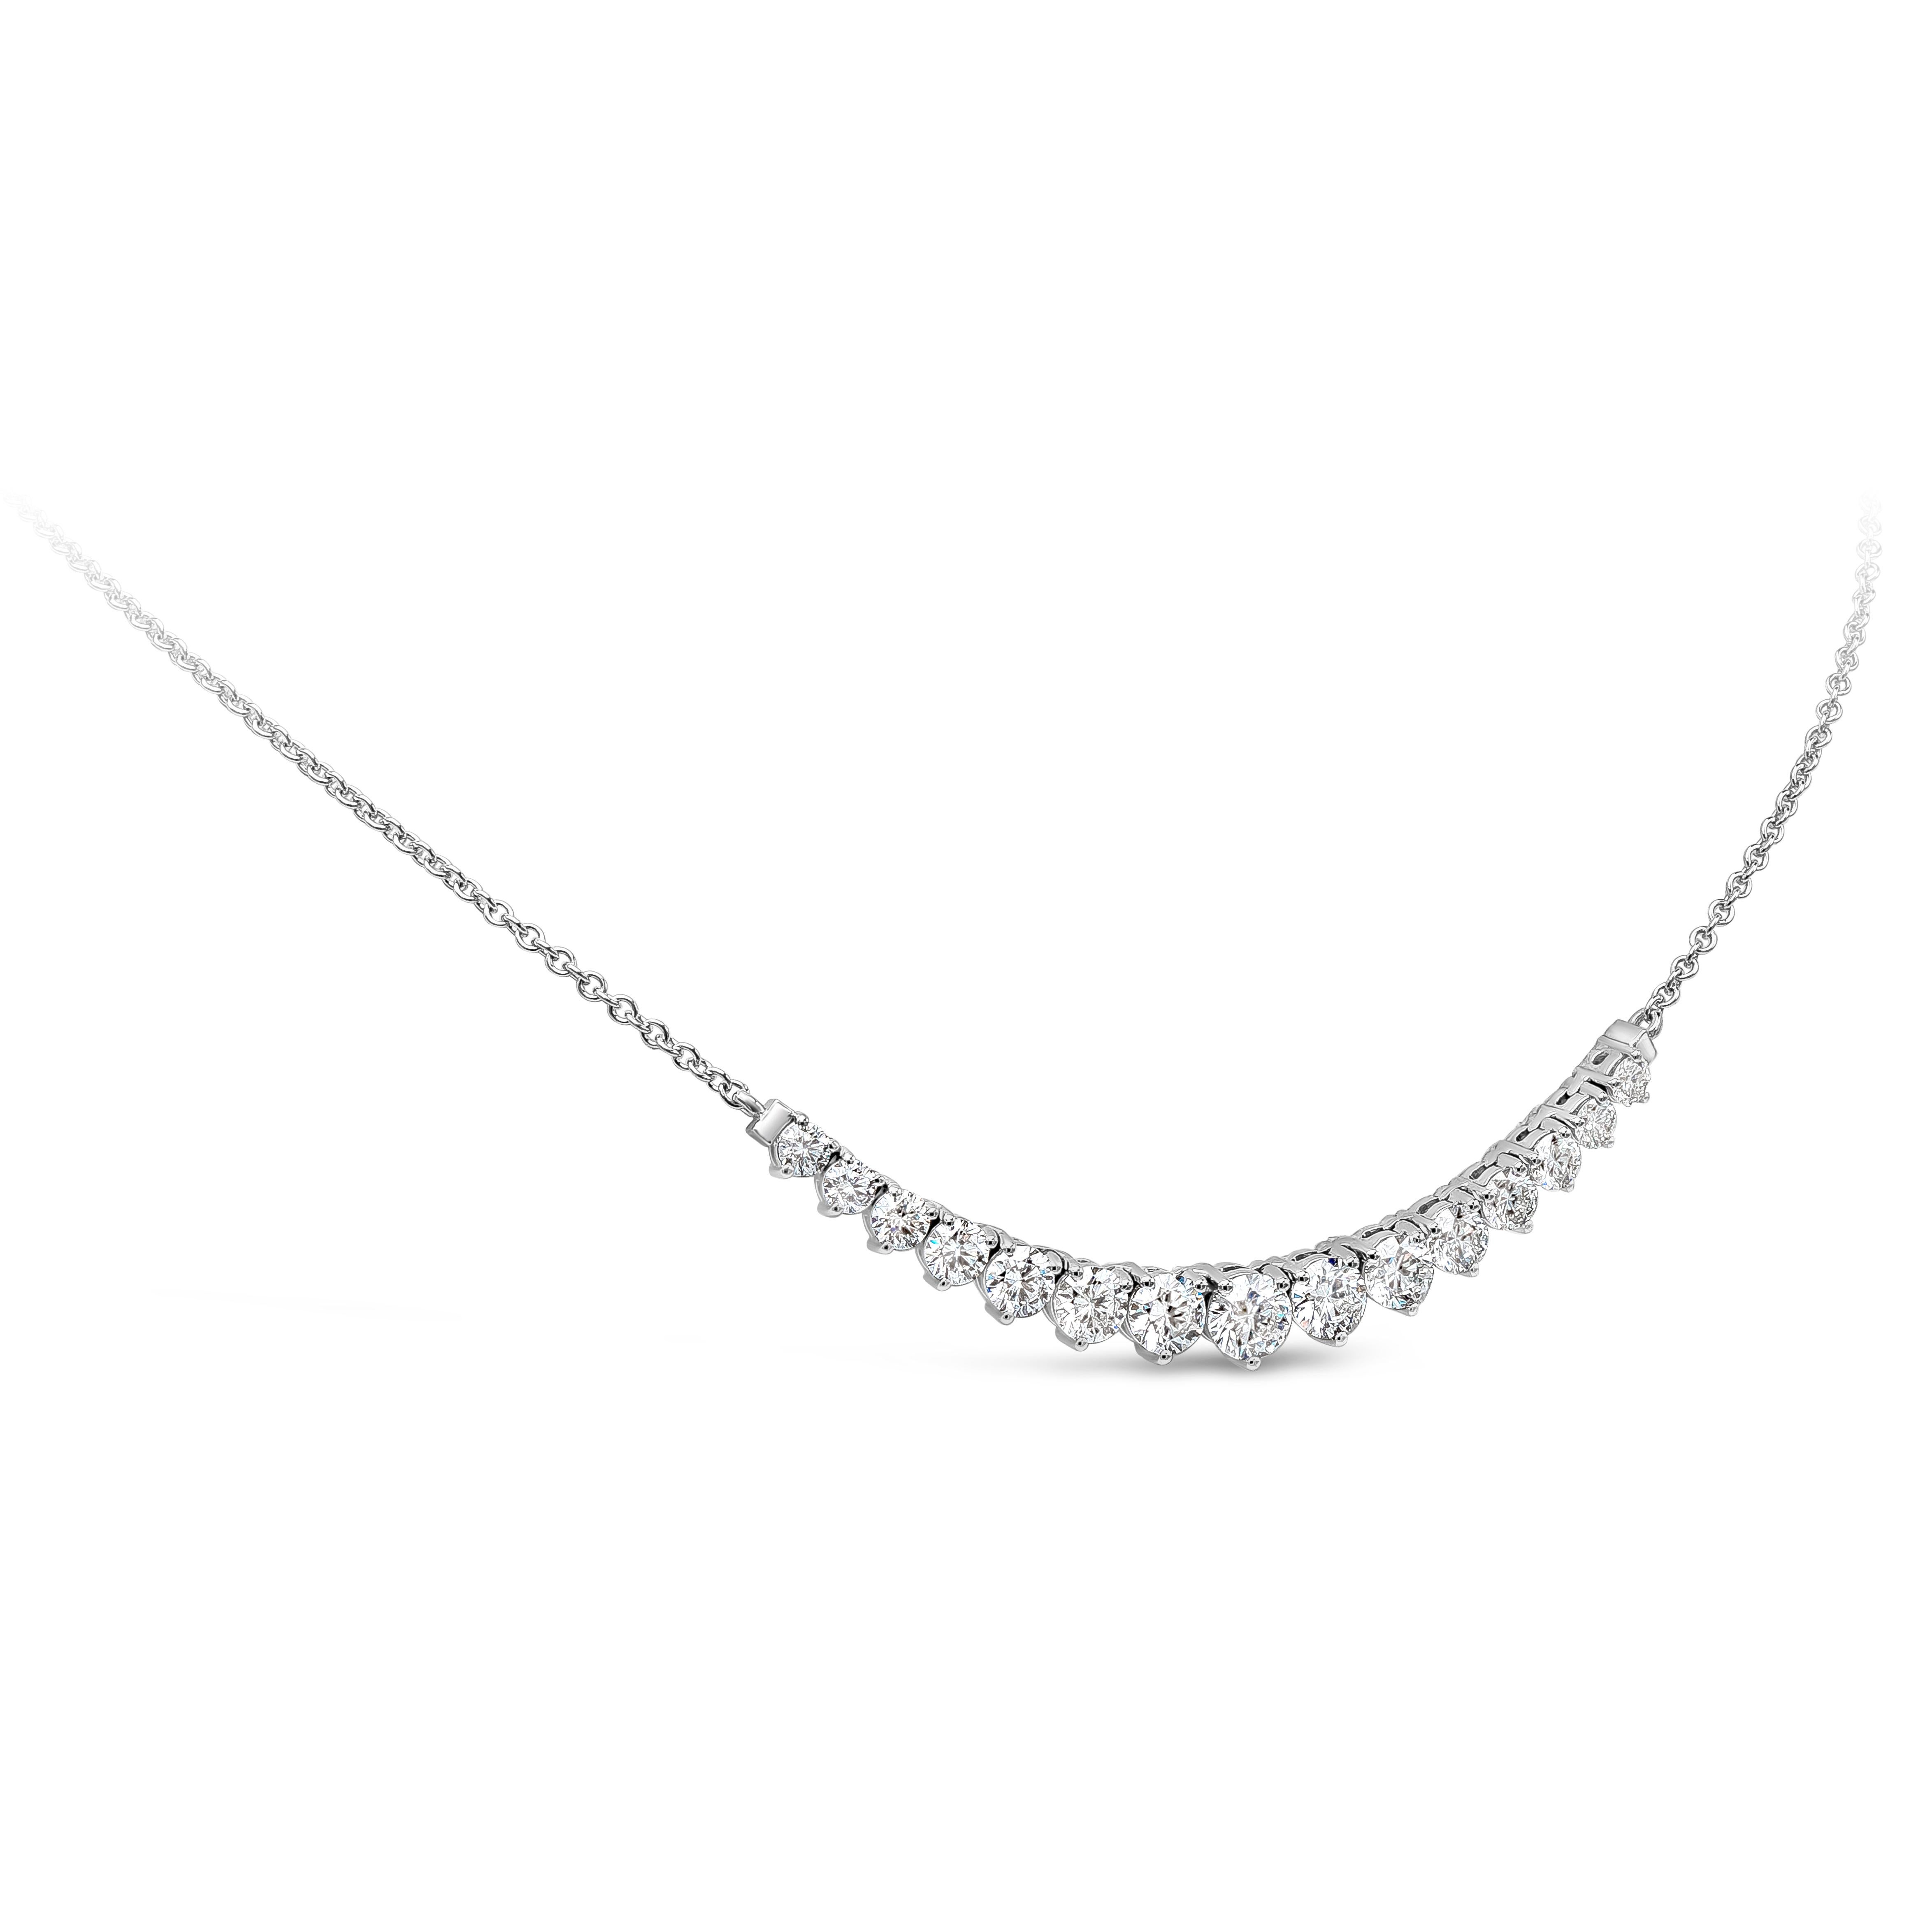 A fashionable mini riviere style necklace showcasing graduating round brilliant round cut diamond weighing 2.85 carats total and are approximately F-G color, SI-I1 clarity, set in a classic three prong basket setting. Finely made in 14k and 18k